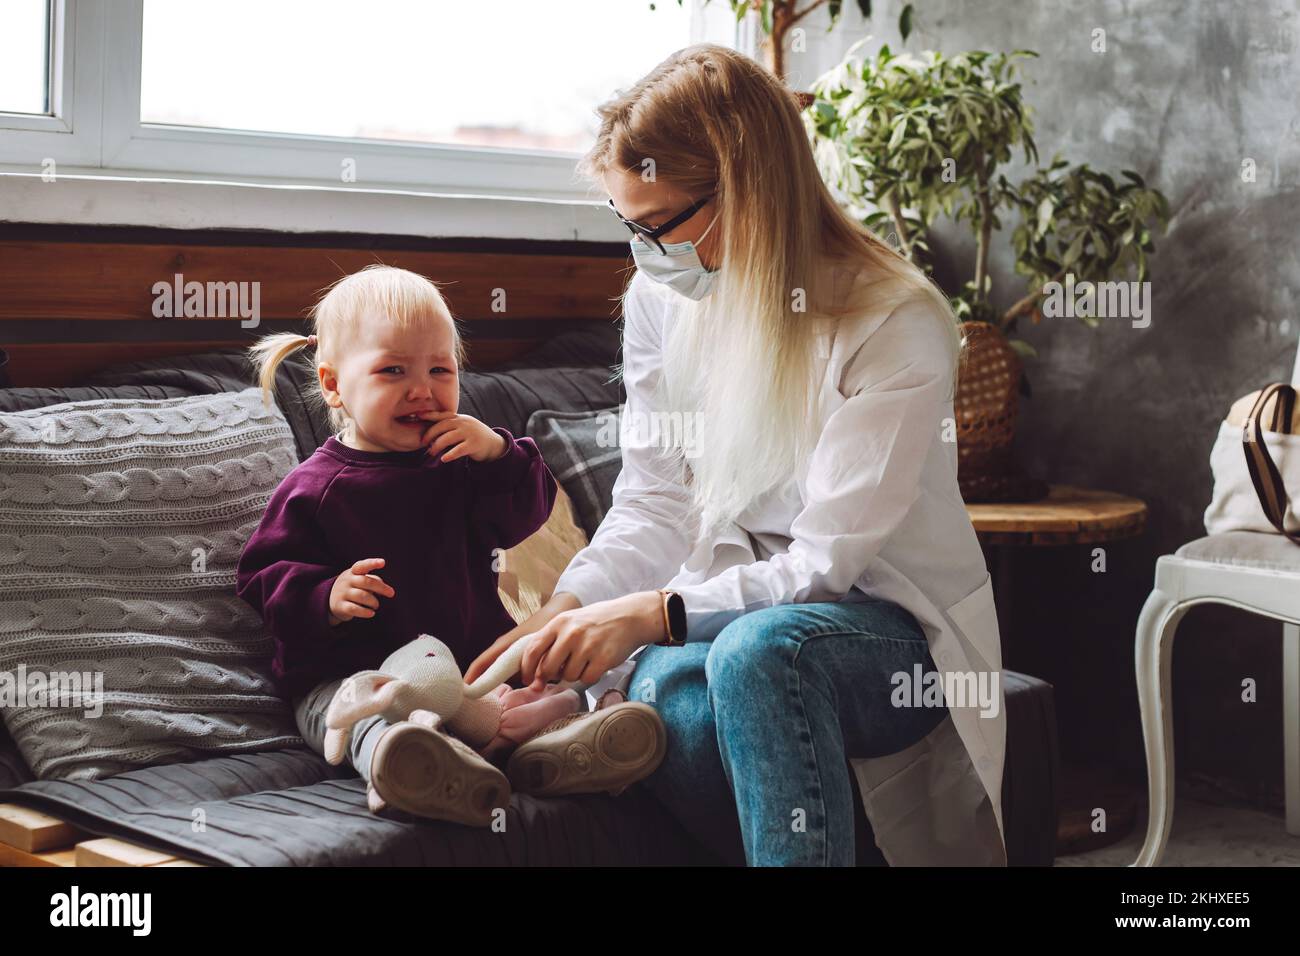 Portrait of sad little girl toddler sitting on sofa, crying near childrens doctor, holding soft toy rabbit at home. Stock Photo